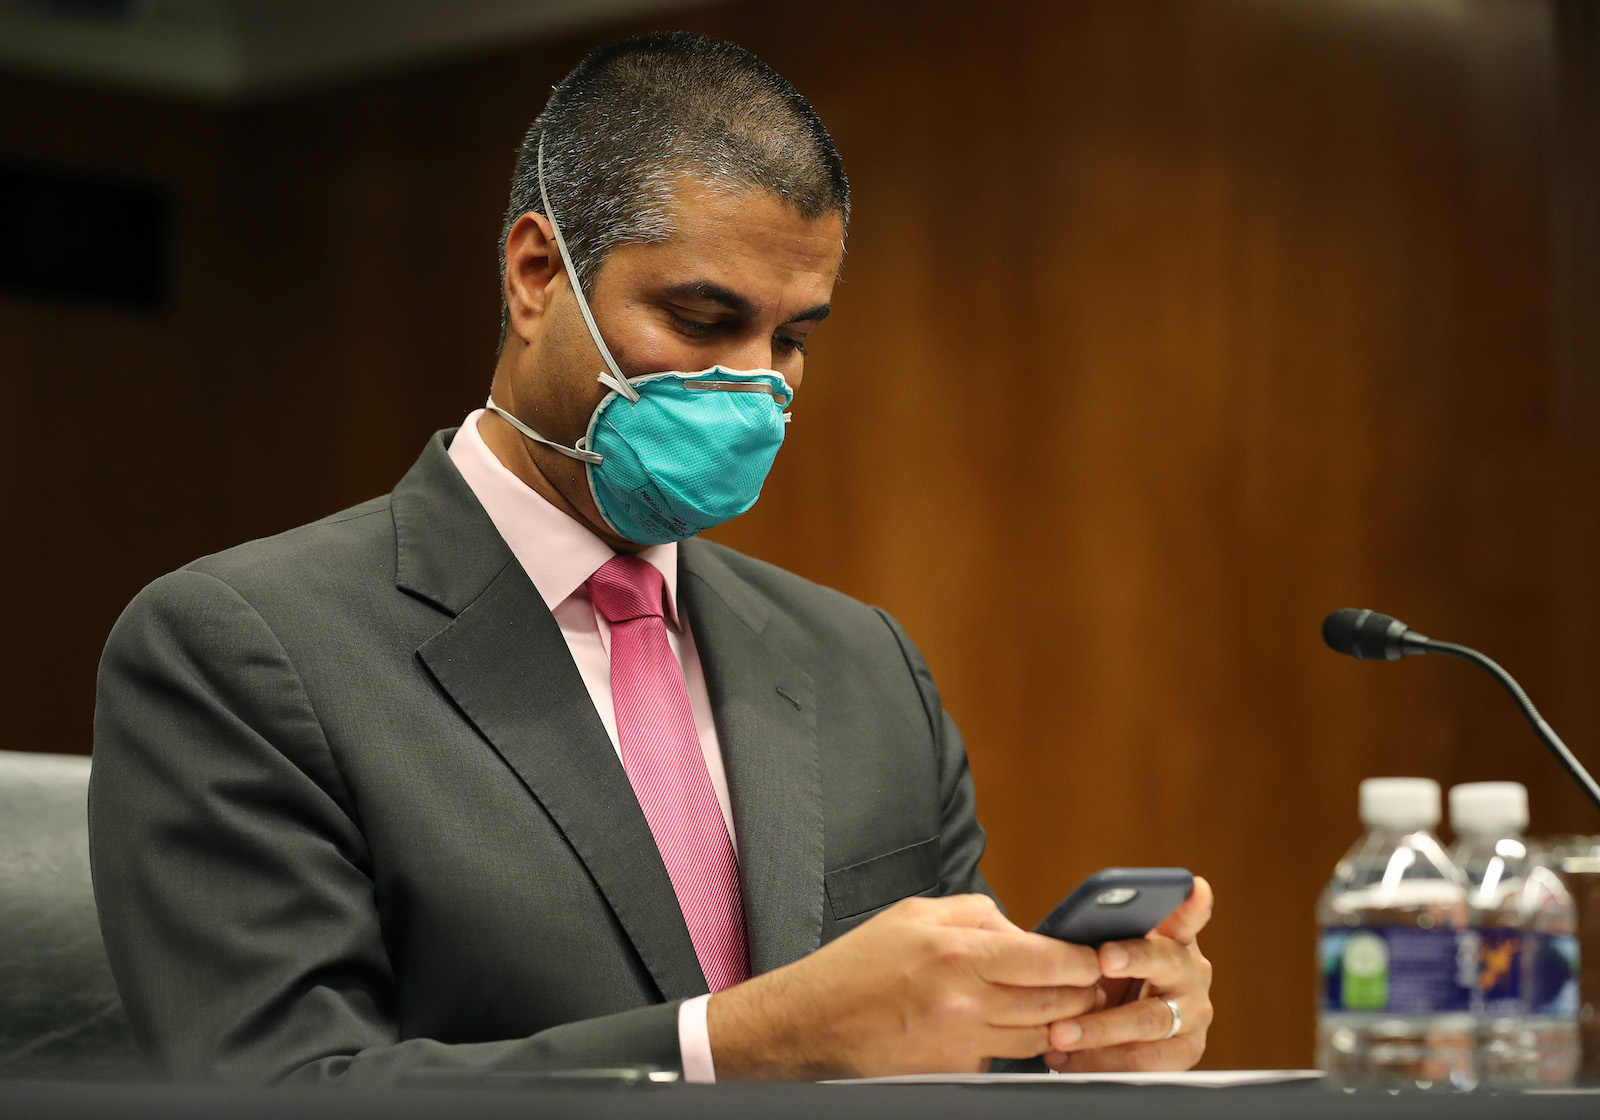 a man in a suit and green face mask looks at his cell phone